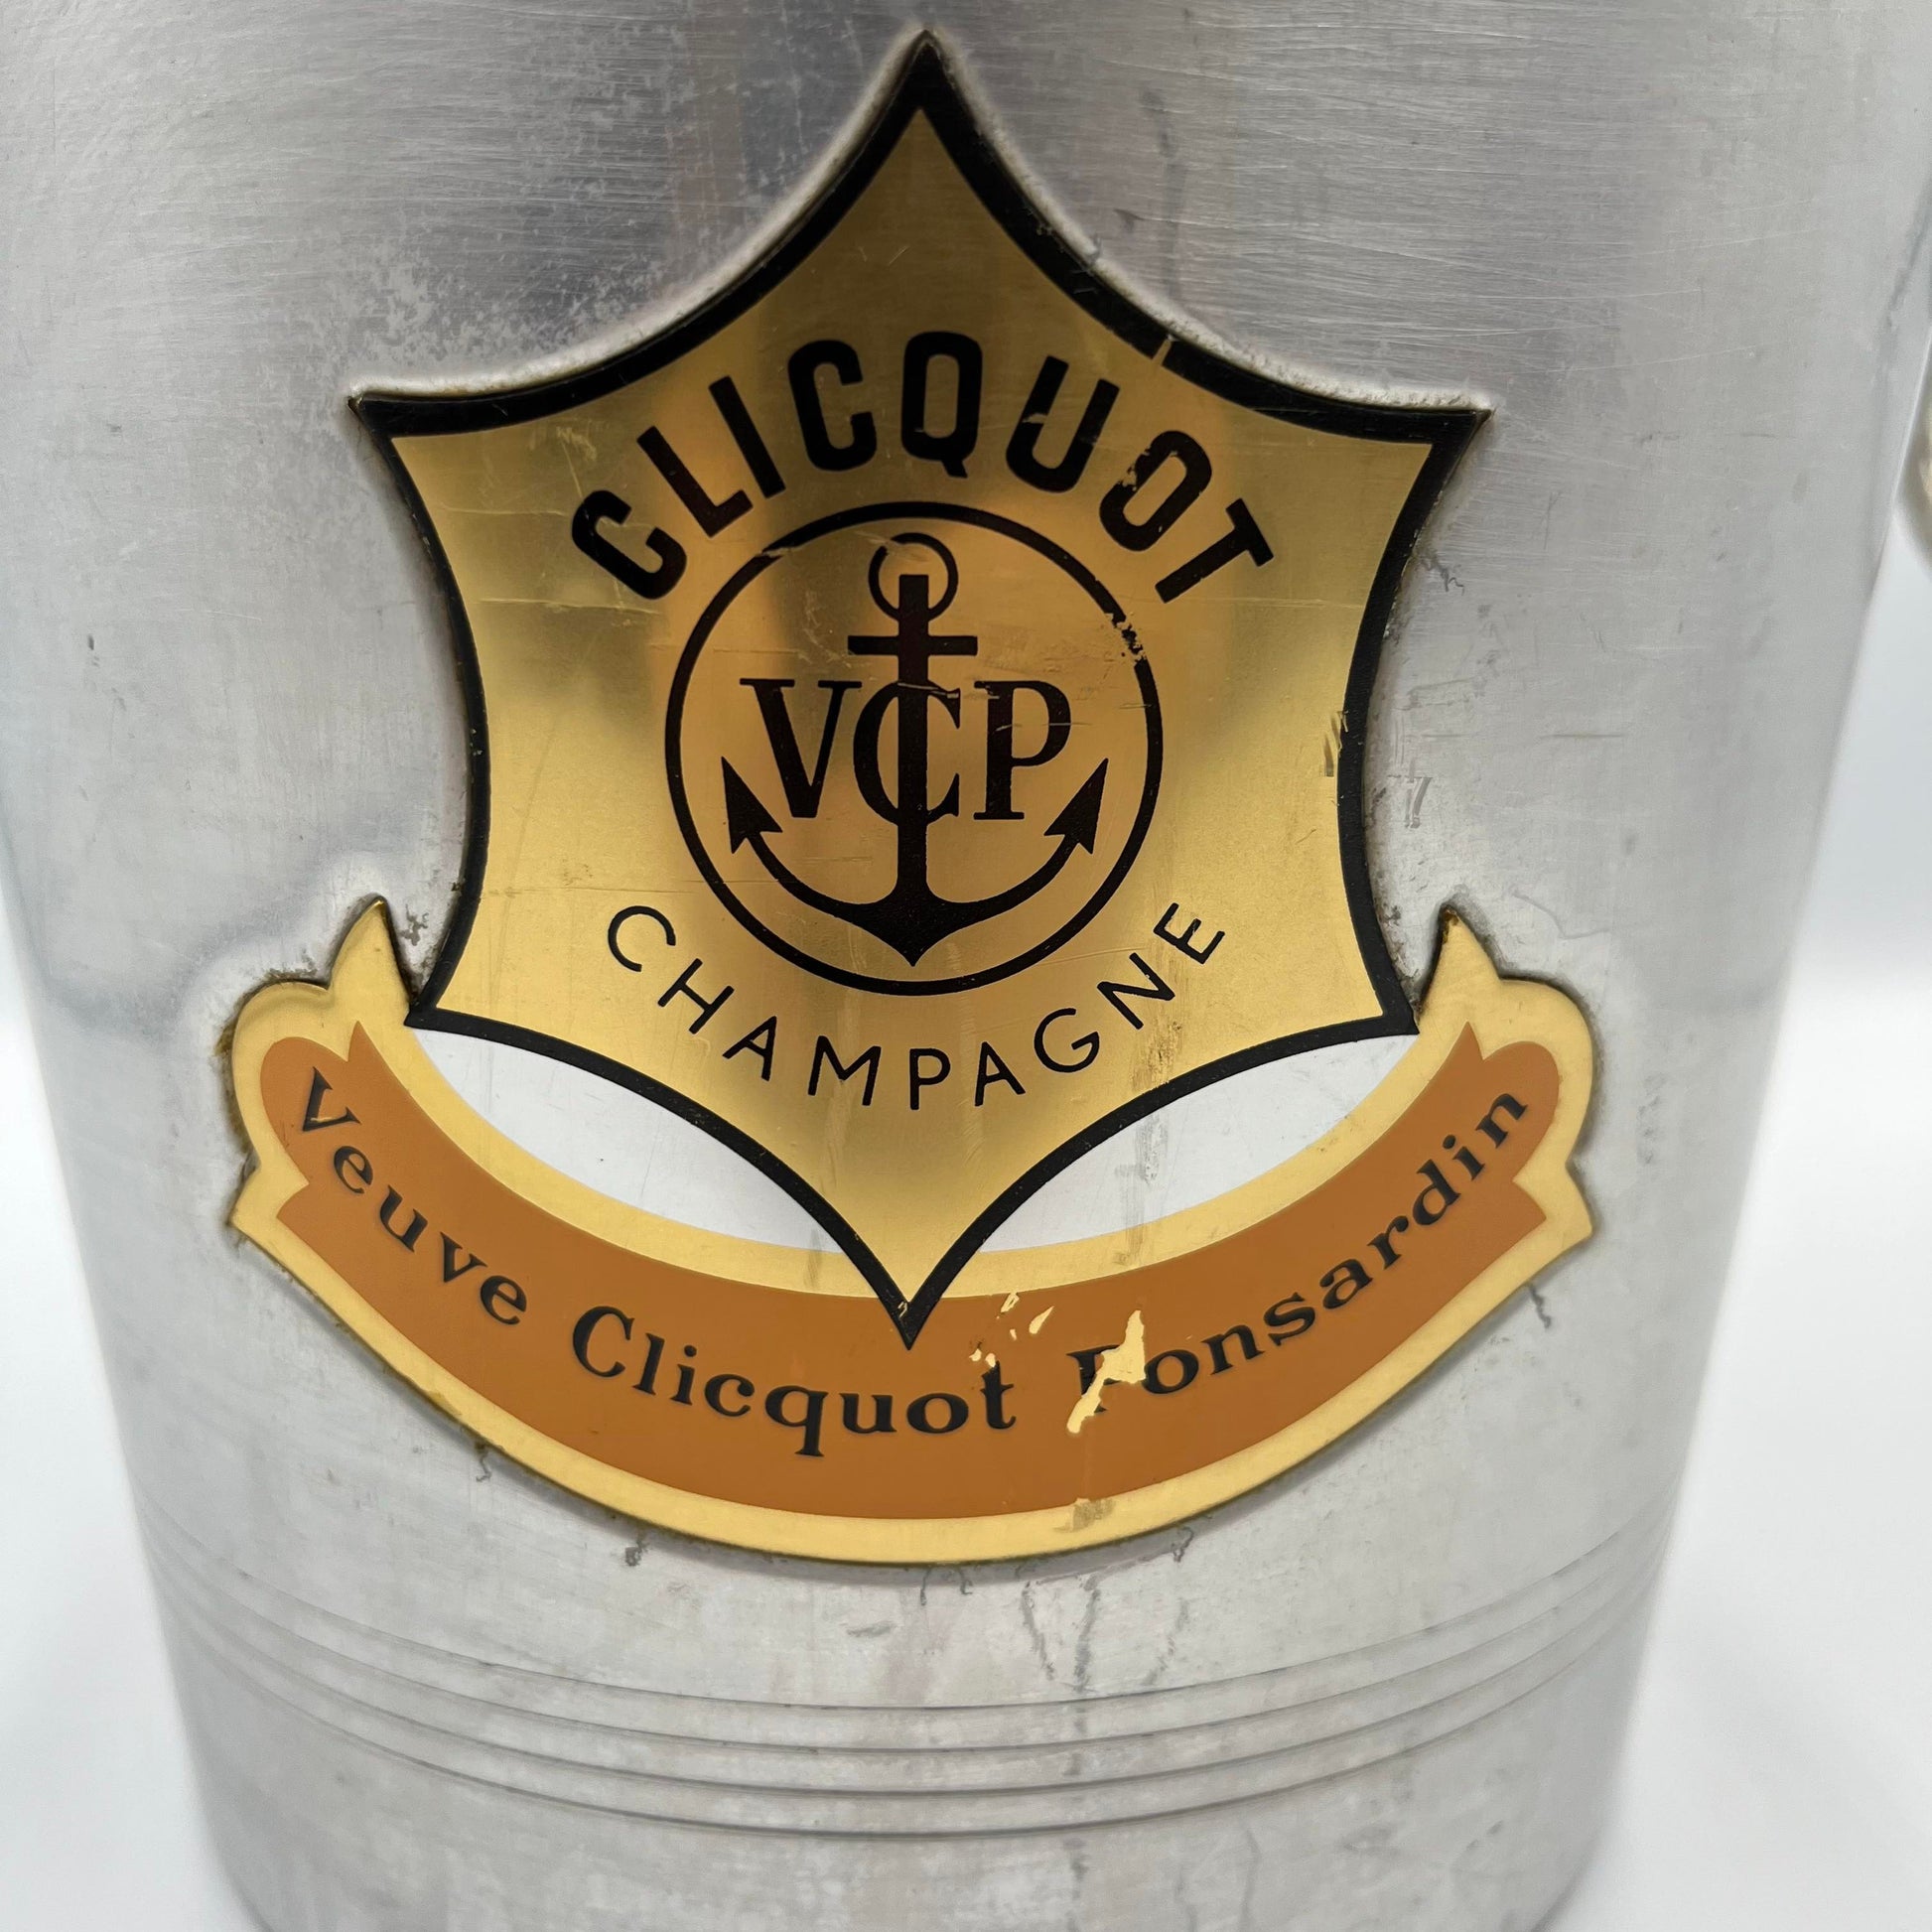 Modern VEUVE CLICQUOT Champagne Bucket. Champagne Barware From 